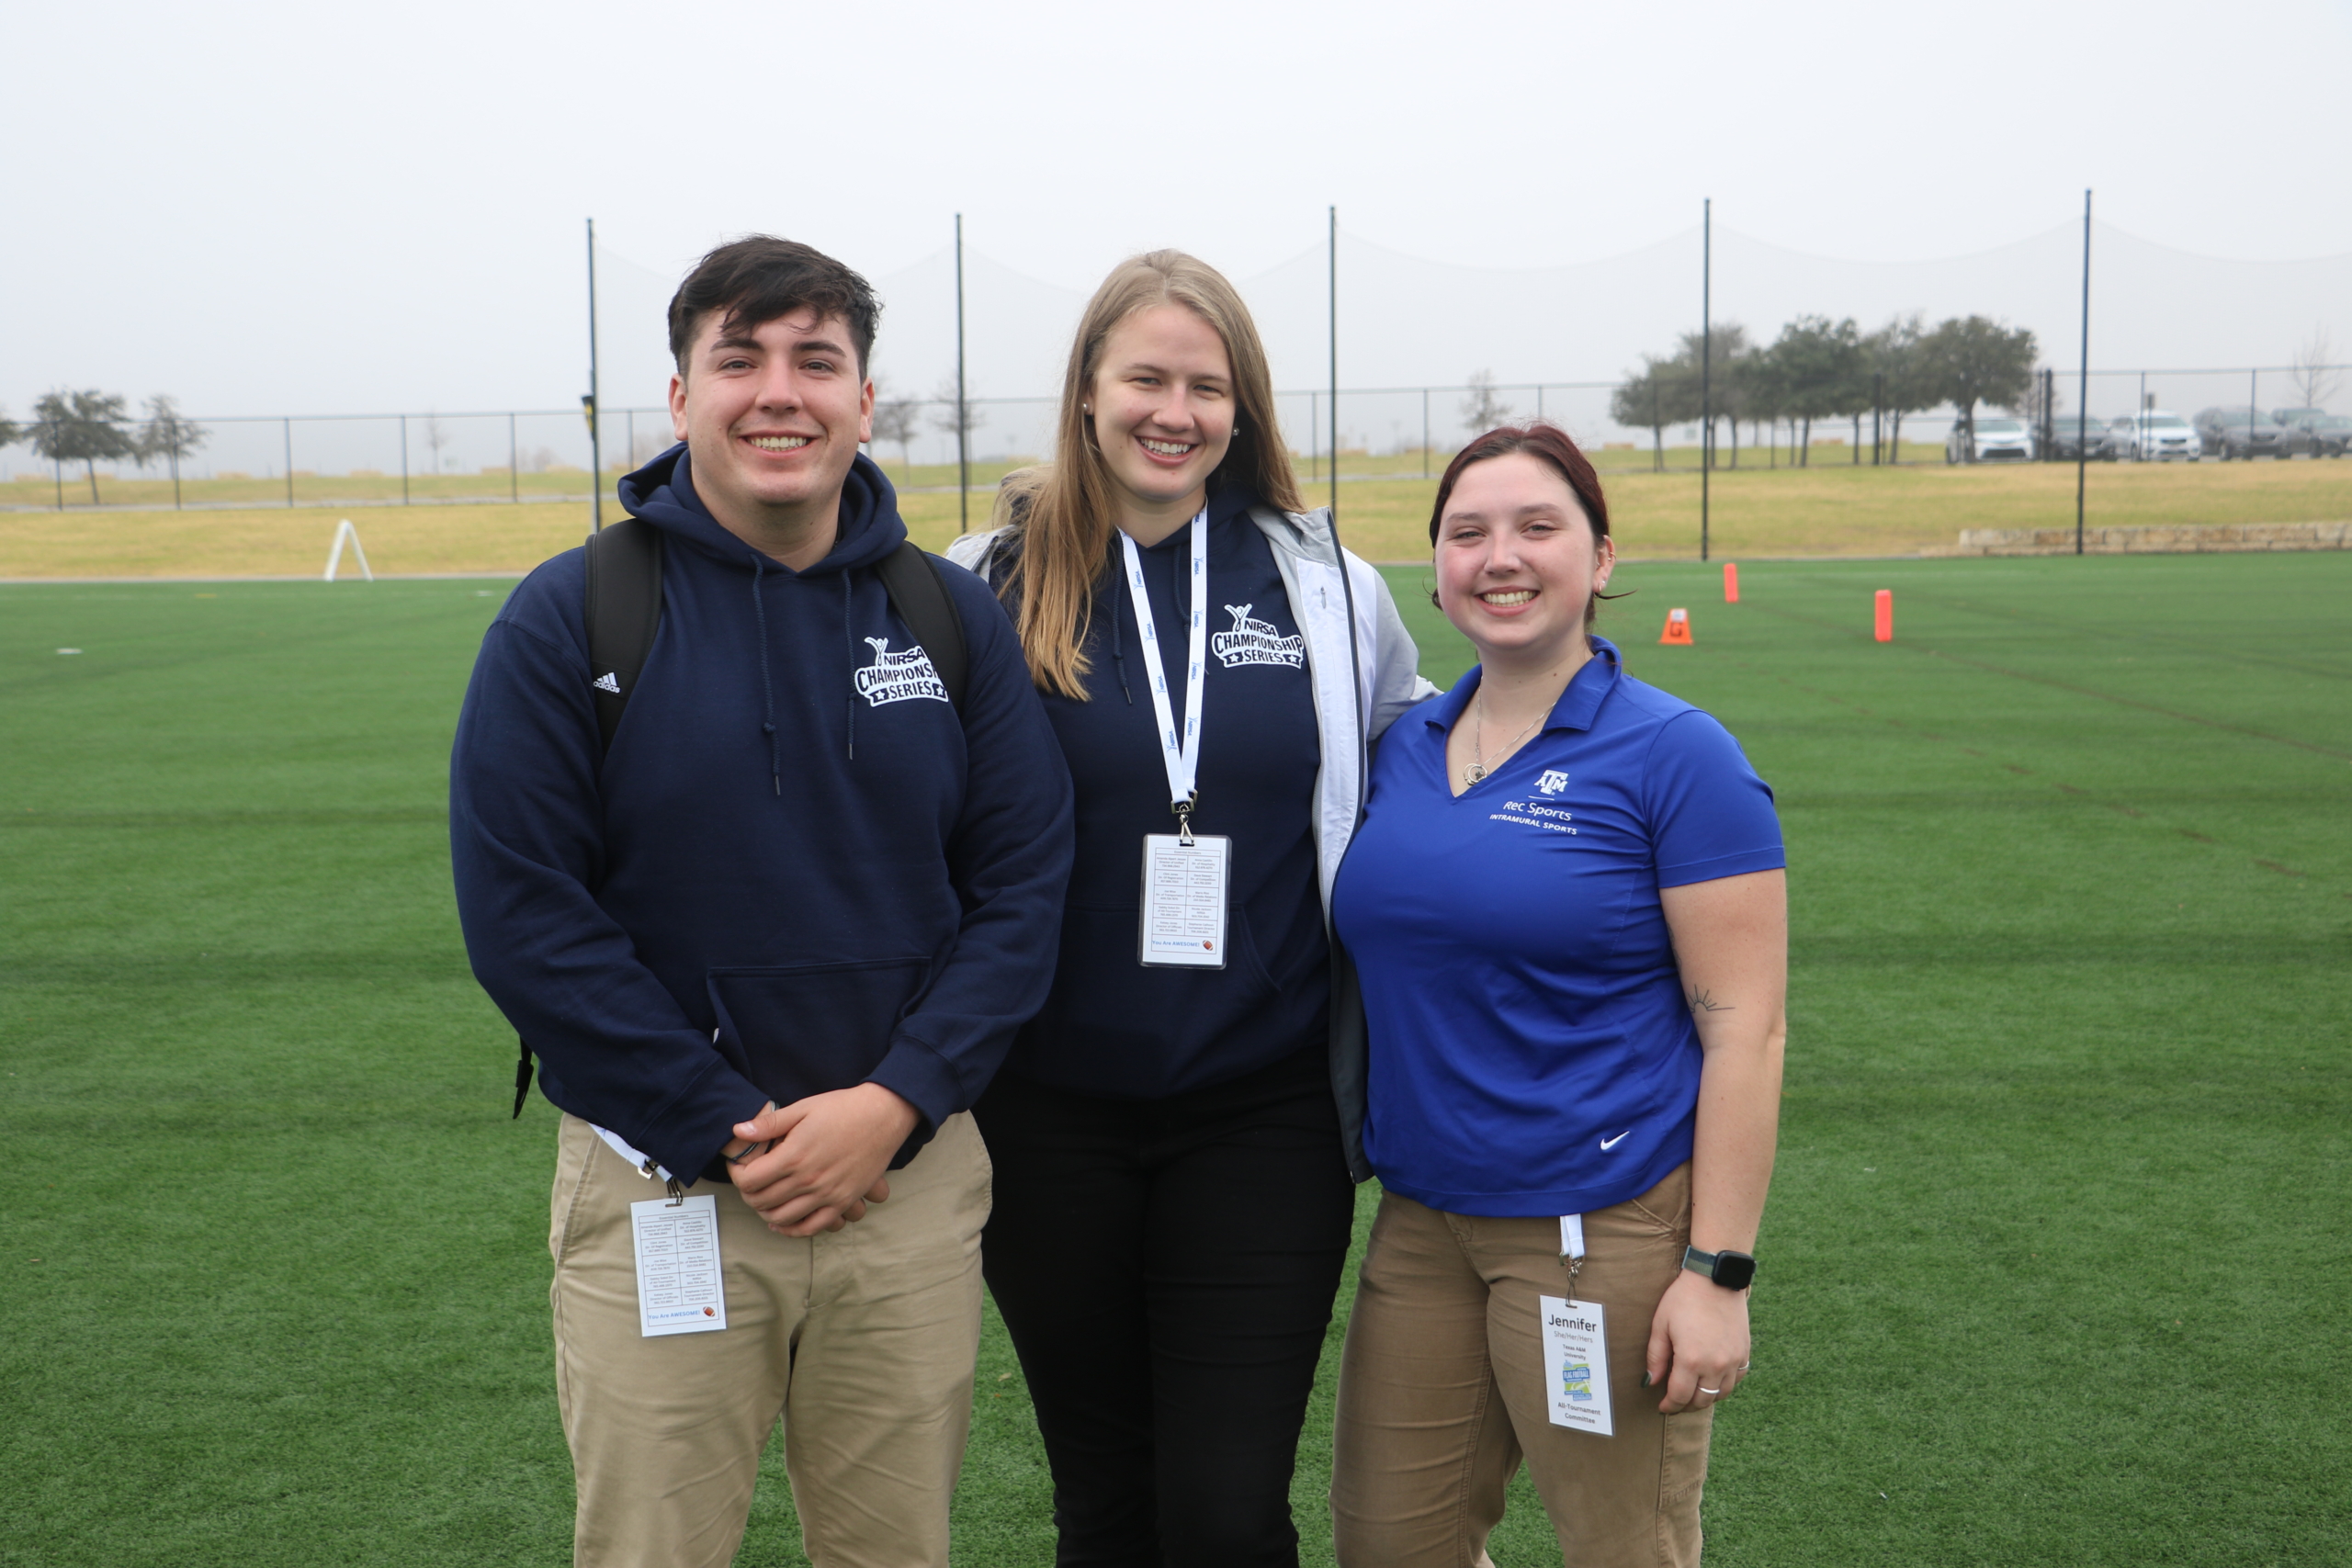 Group photo of three staff on a field